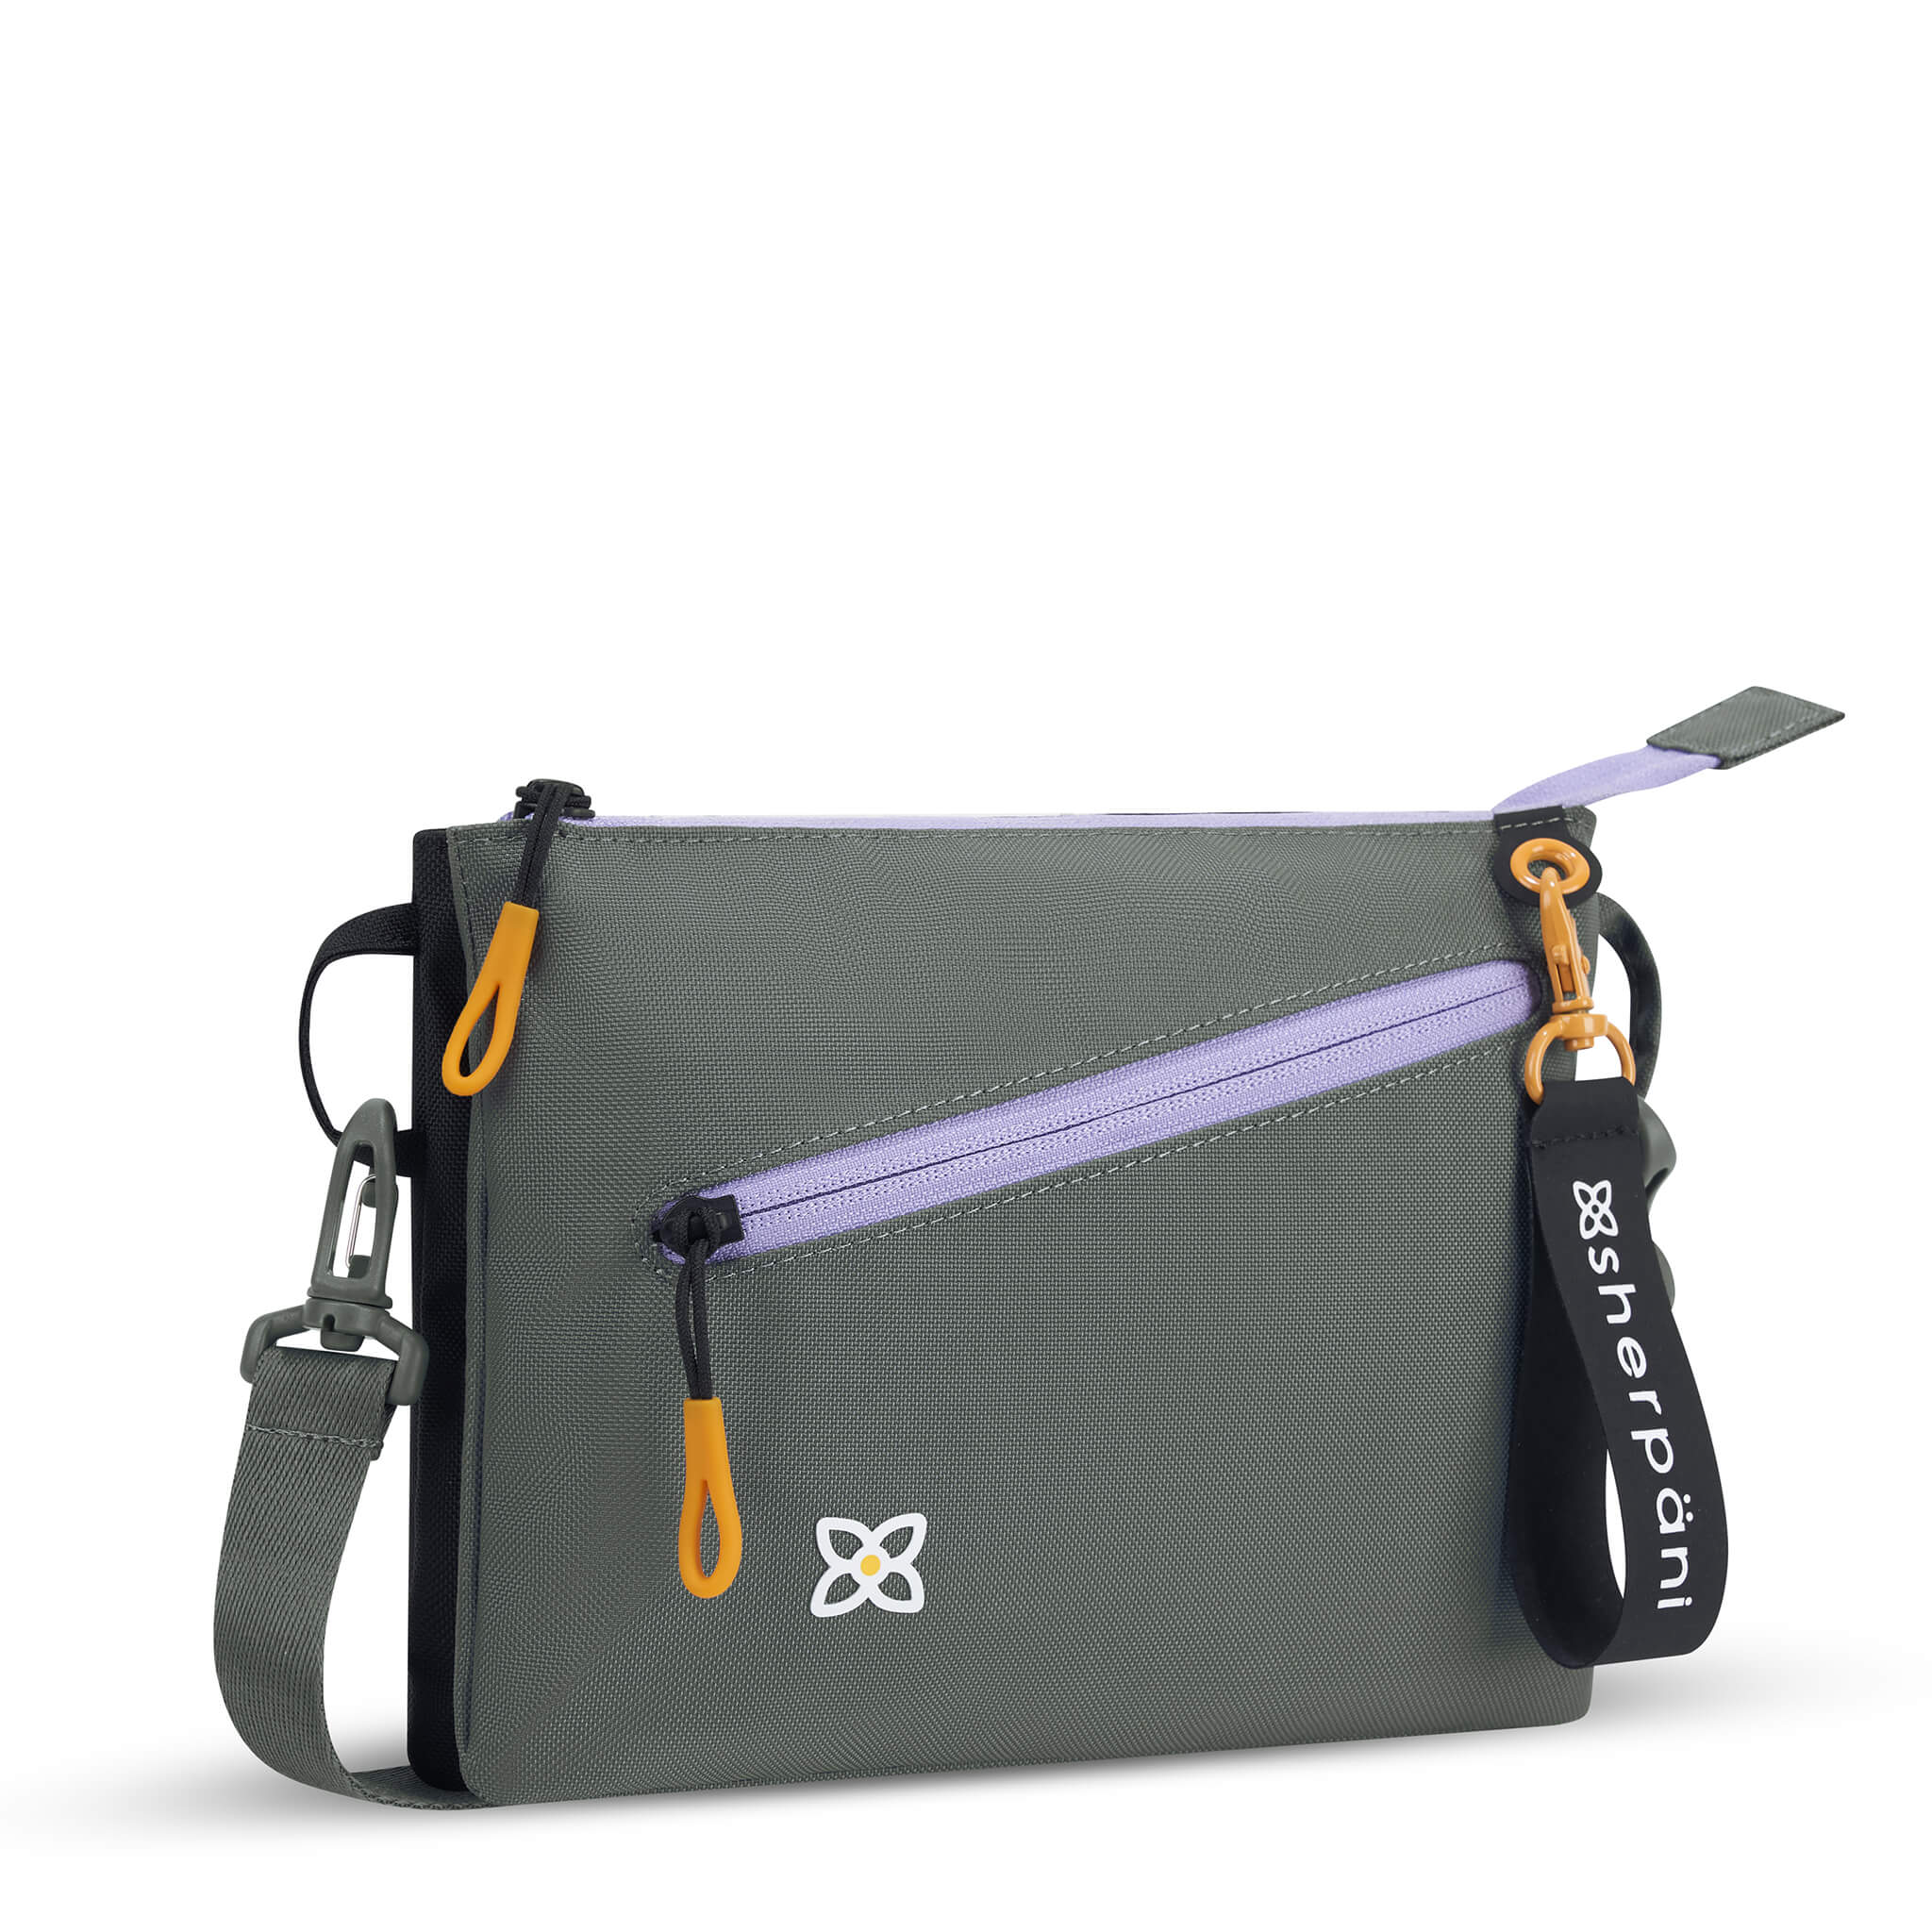 Angled front view of Sherpani small crossbody bag, the Zoom in Juniper. Special features of the Zoom include RFID protection, adjustable crossbody strap, removable strap, removable keychain, outside zipper pocket, internal divider, internal zipper pockets and back slip pocket. The Juniper color is two-toned in gray and black with accents in yellow and purple.